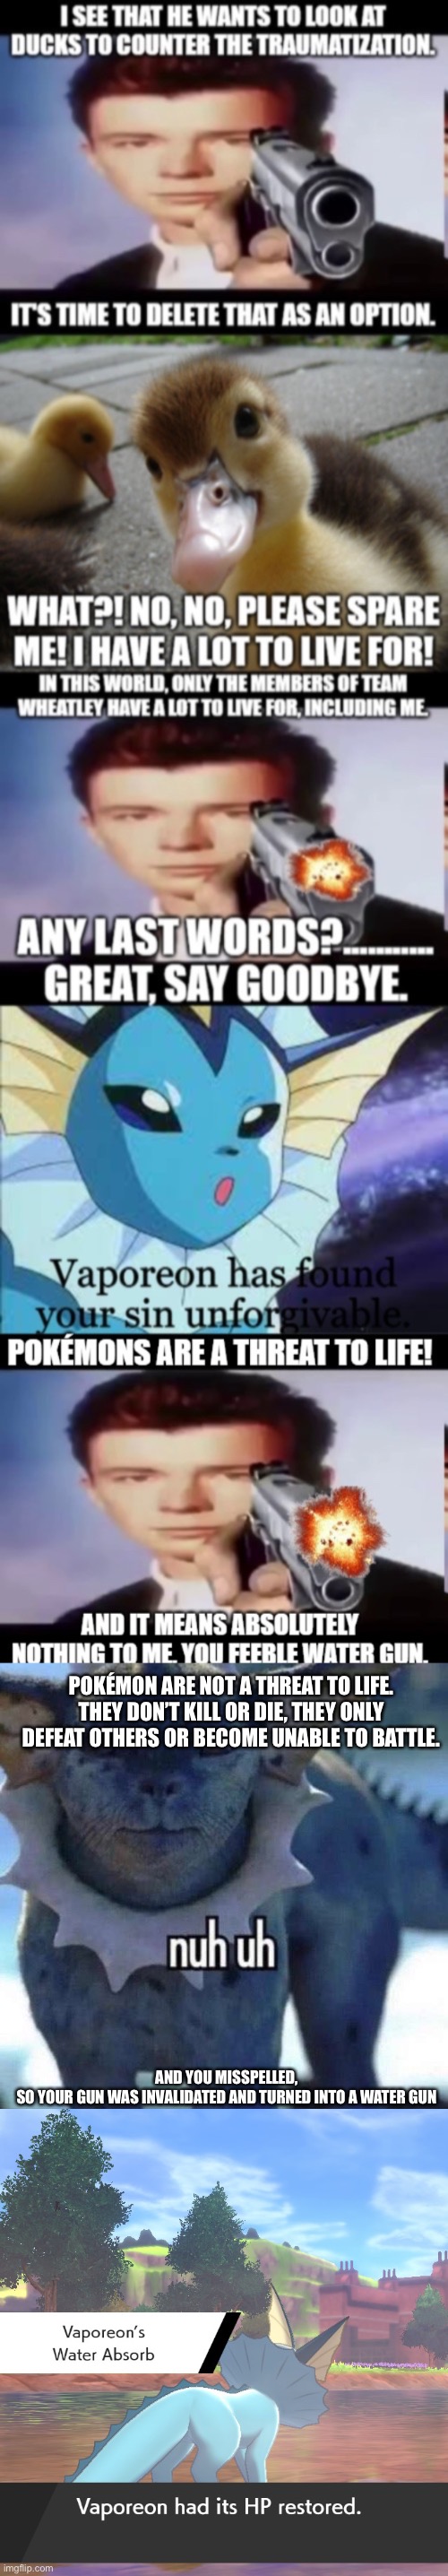 Pokémon never die in games, they only faint. So they’re not a threat to life. (And the plural of Pokémon is still Pokémon) | POKÉMON ARE NOT A THREAT TO LIFE. THEY DON’T KILL OR DIE, THEY ONLY DEFEAT OTHERS OR BECOME UNABLE TO BATTLE. AND YOU MISSPELLED,
SO YOUR GUN WAS INVALIDATED AND TURNED INTO A WATER GUN | image tagged in nuh uh | made w/ Imgflip meme maker